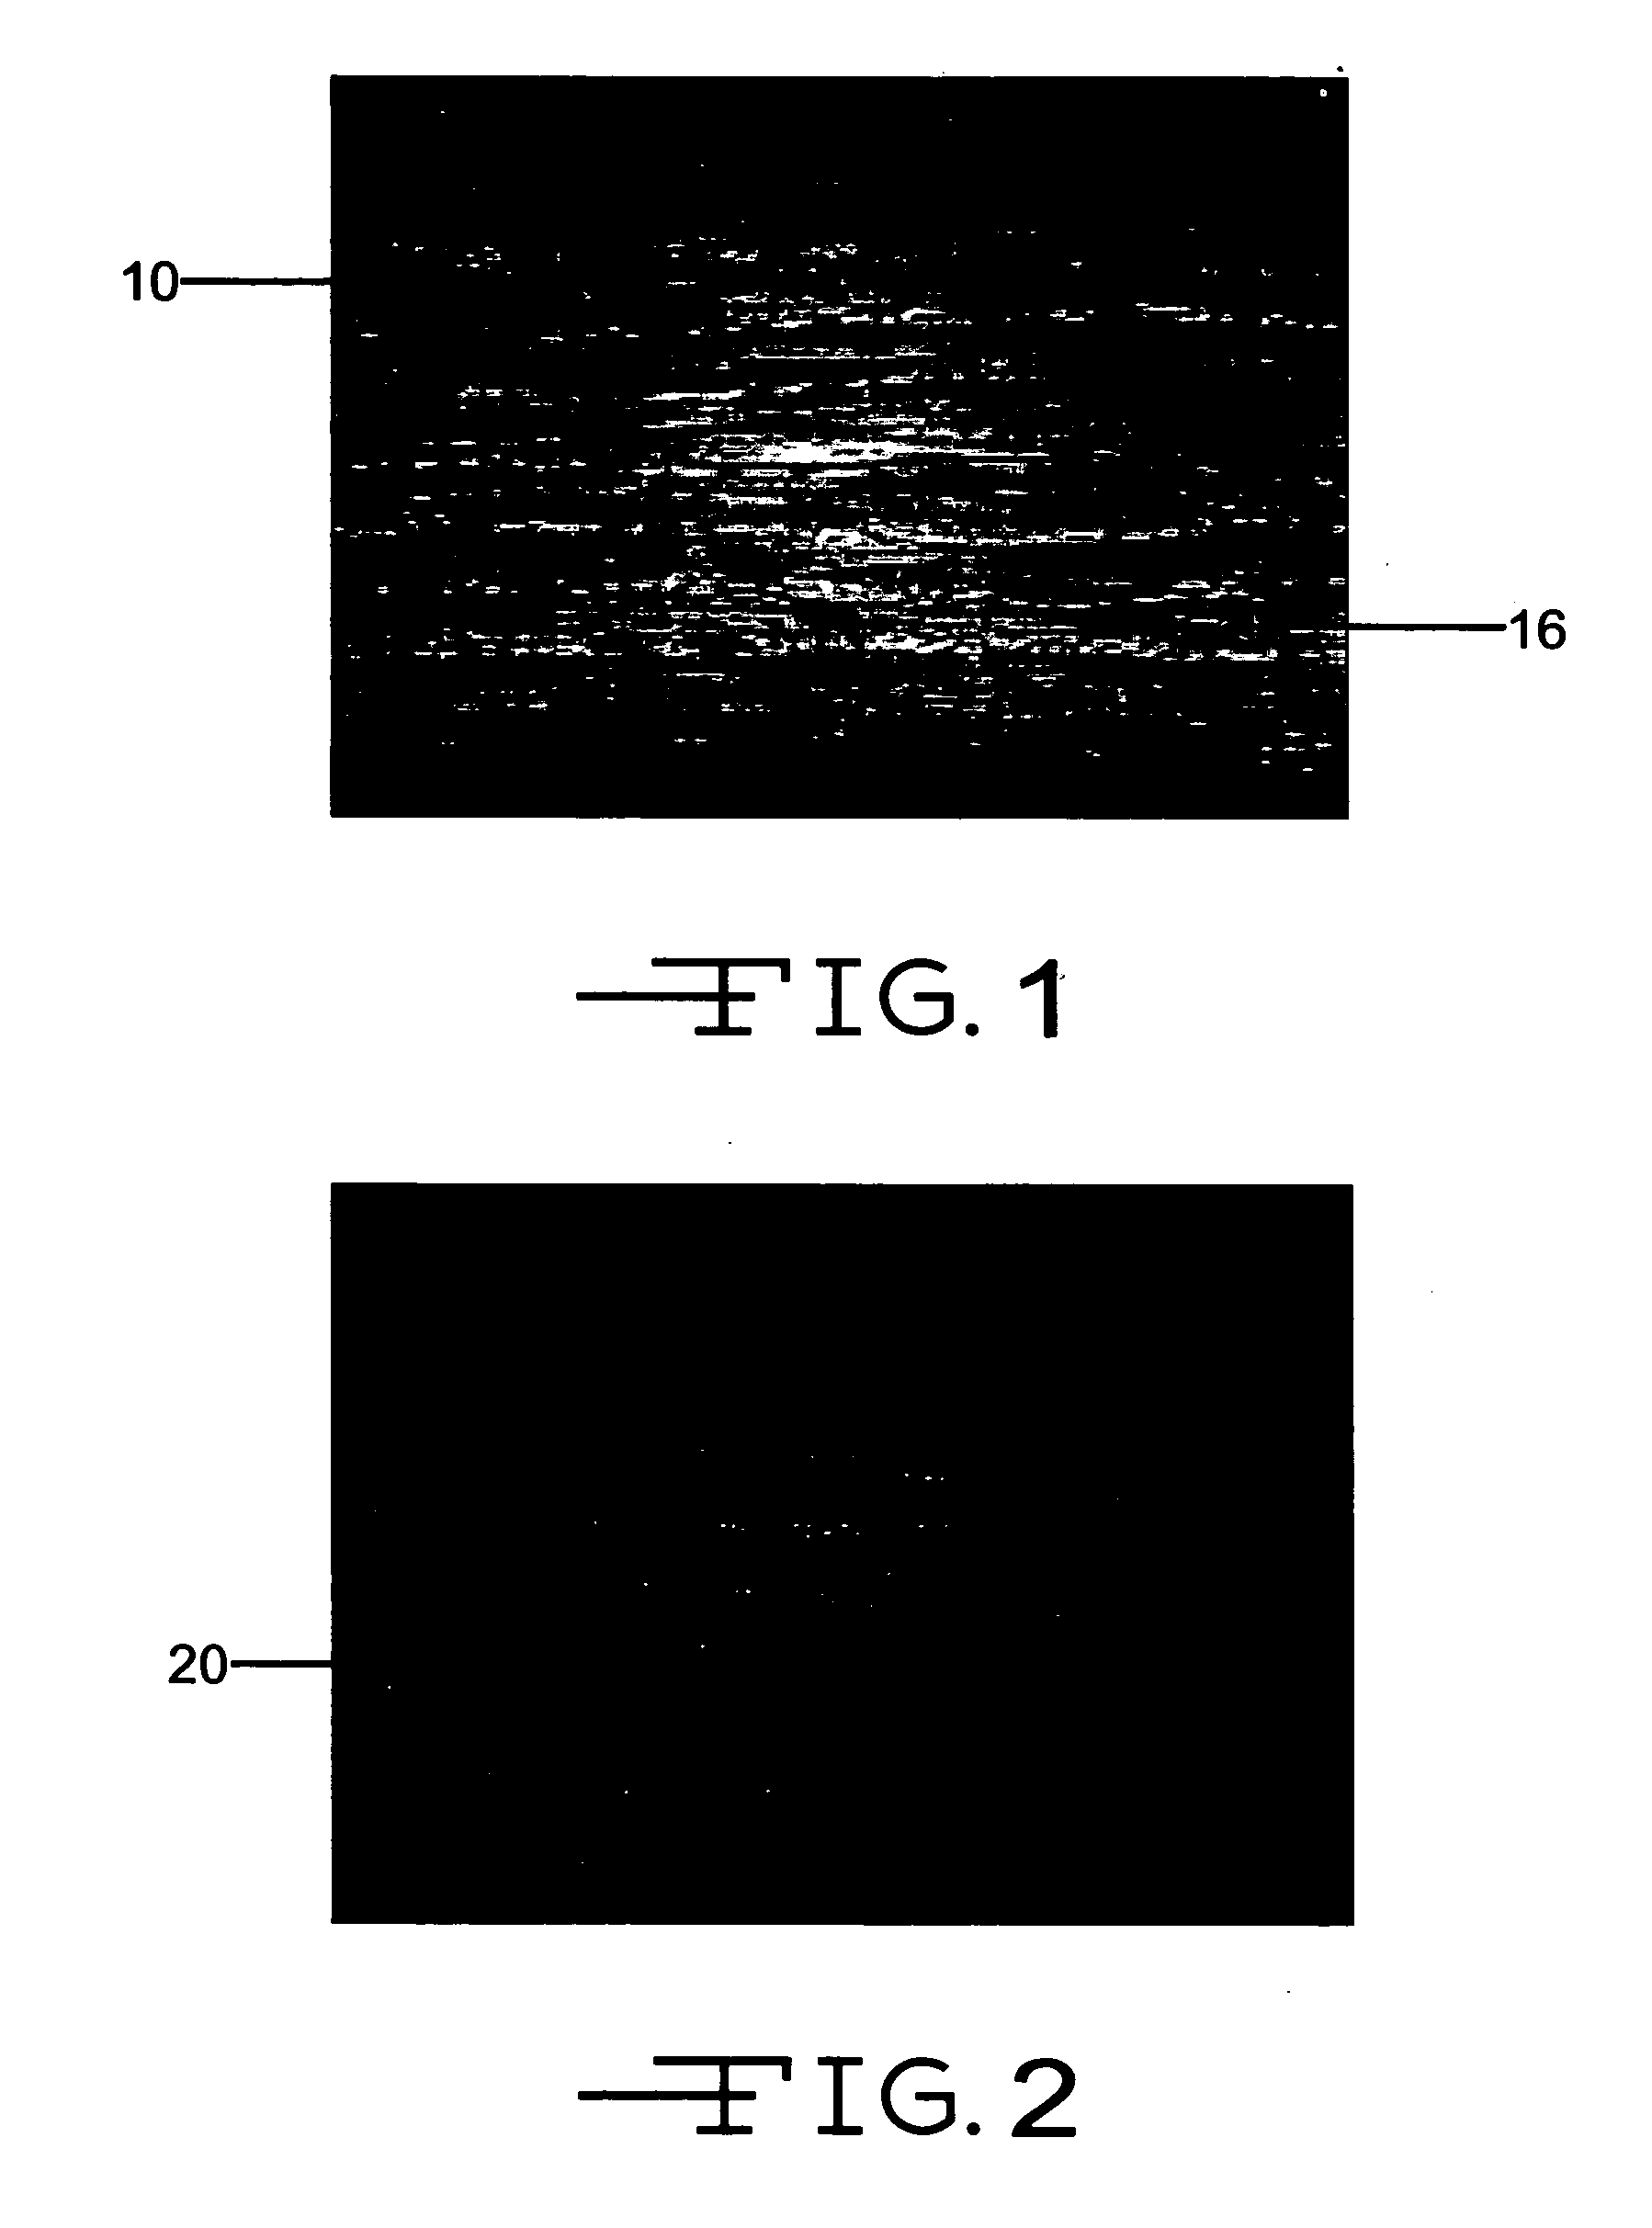 Ultrasonic inspection reference standard for porous composite materials